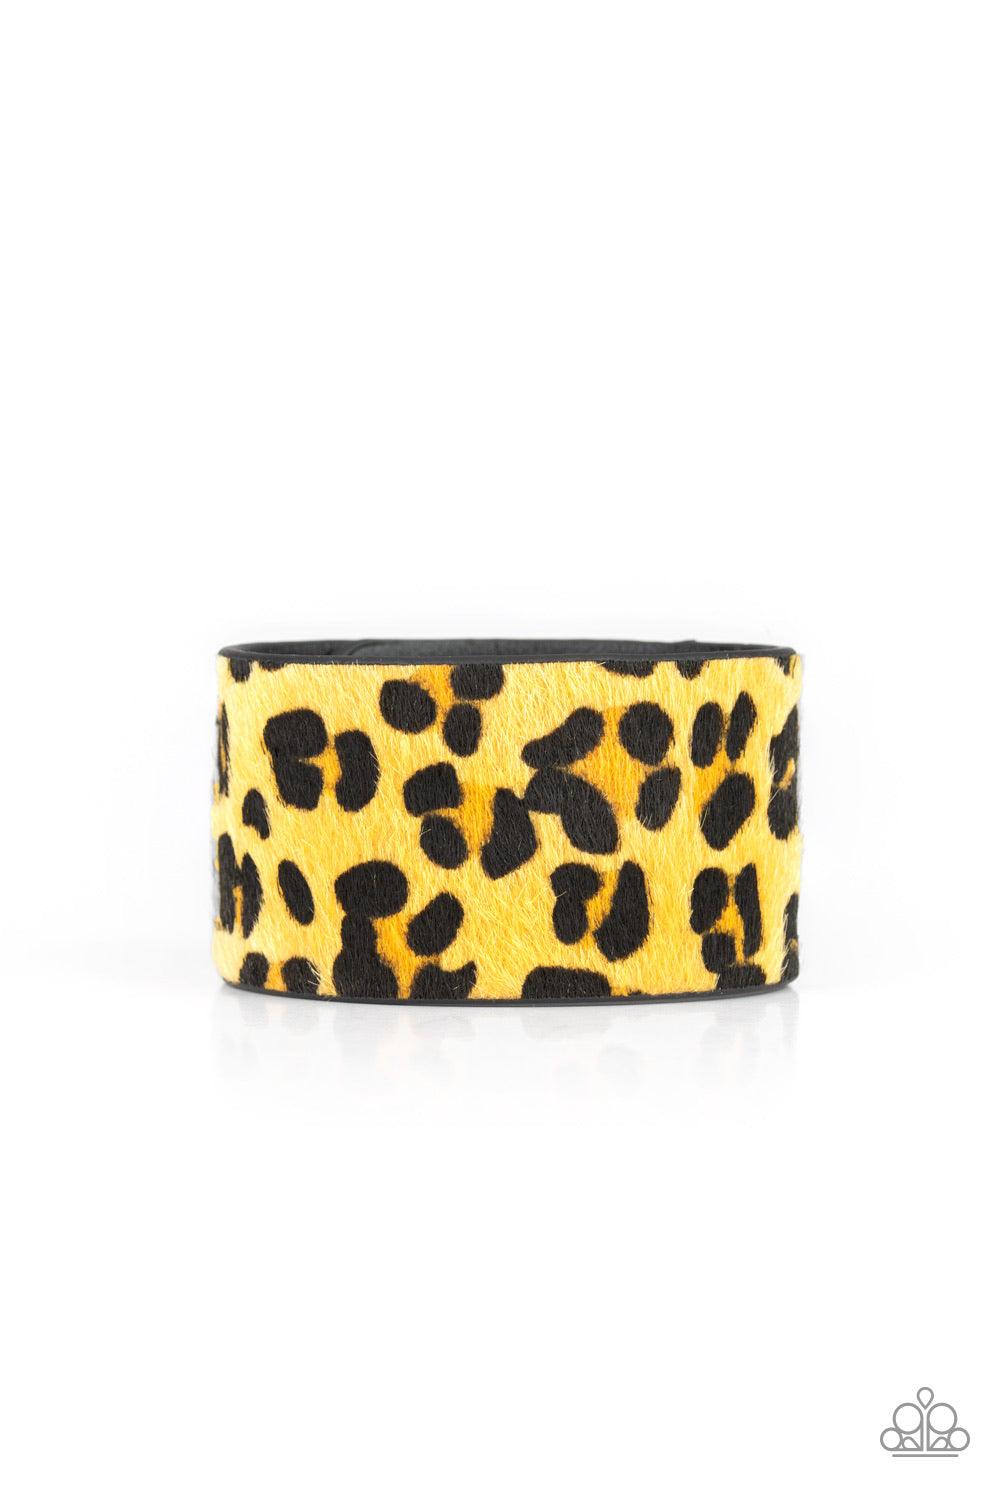 Paparazzi Accessories Cheetah Cabana - Yellow A fuzzy yellow cheetah pattern is printed across the front of a thick black leather band for a wild look. Features an adjustable snap closure. Jewelry